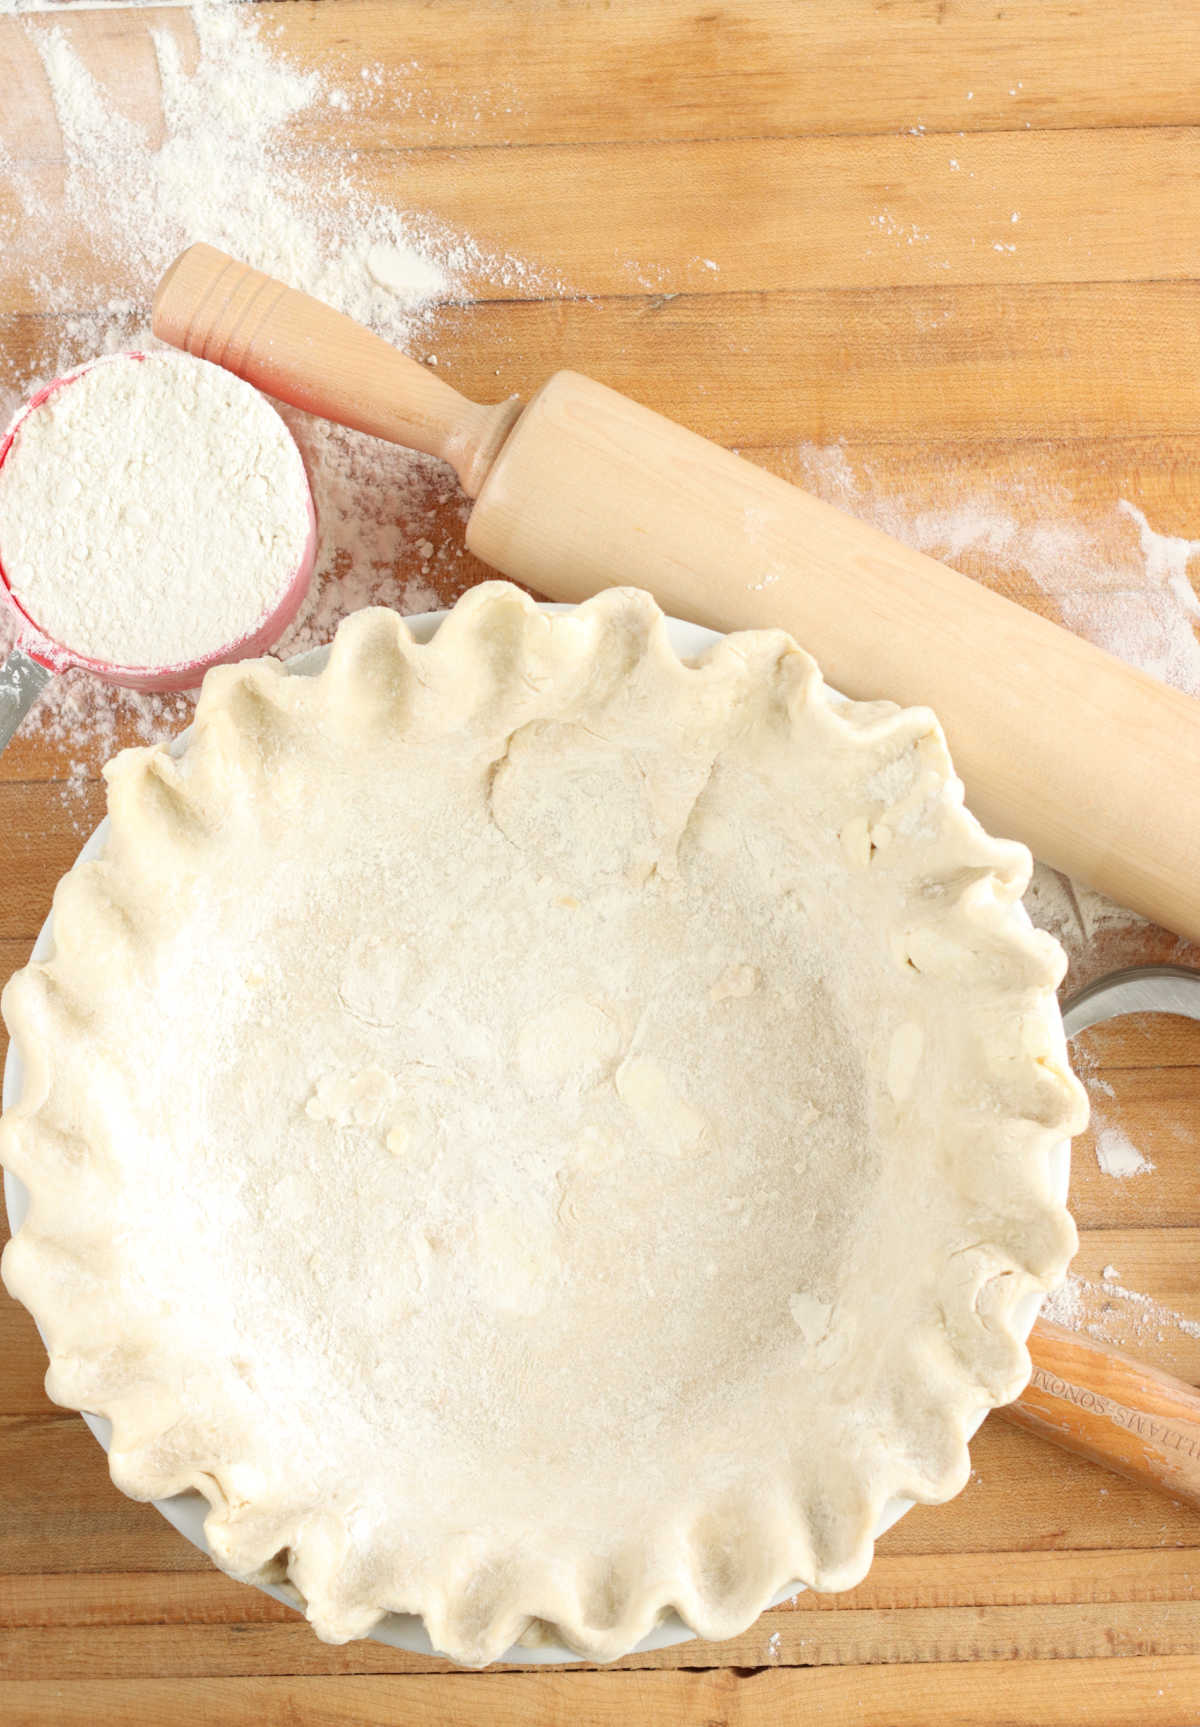 Unbaked pie shell on wooden cutting board with wooden rolling pin and cup of flour.